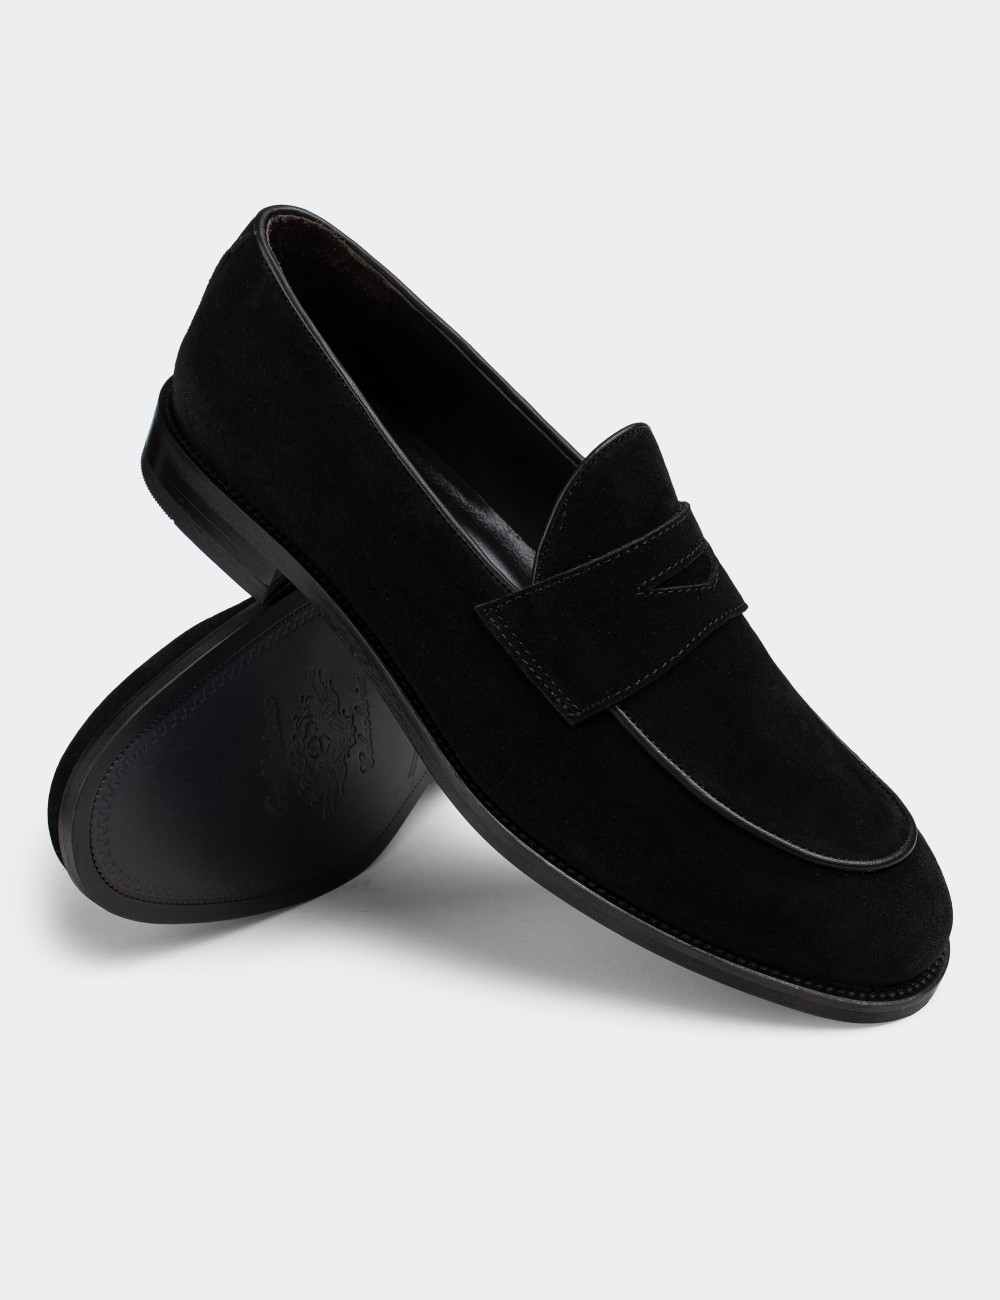 Black Suede Leather Loafers - 01845MSYHN02